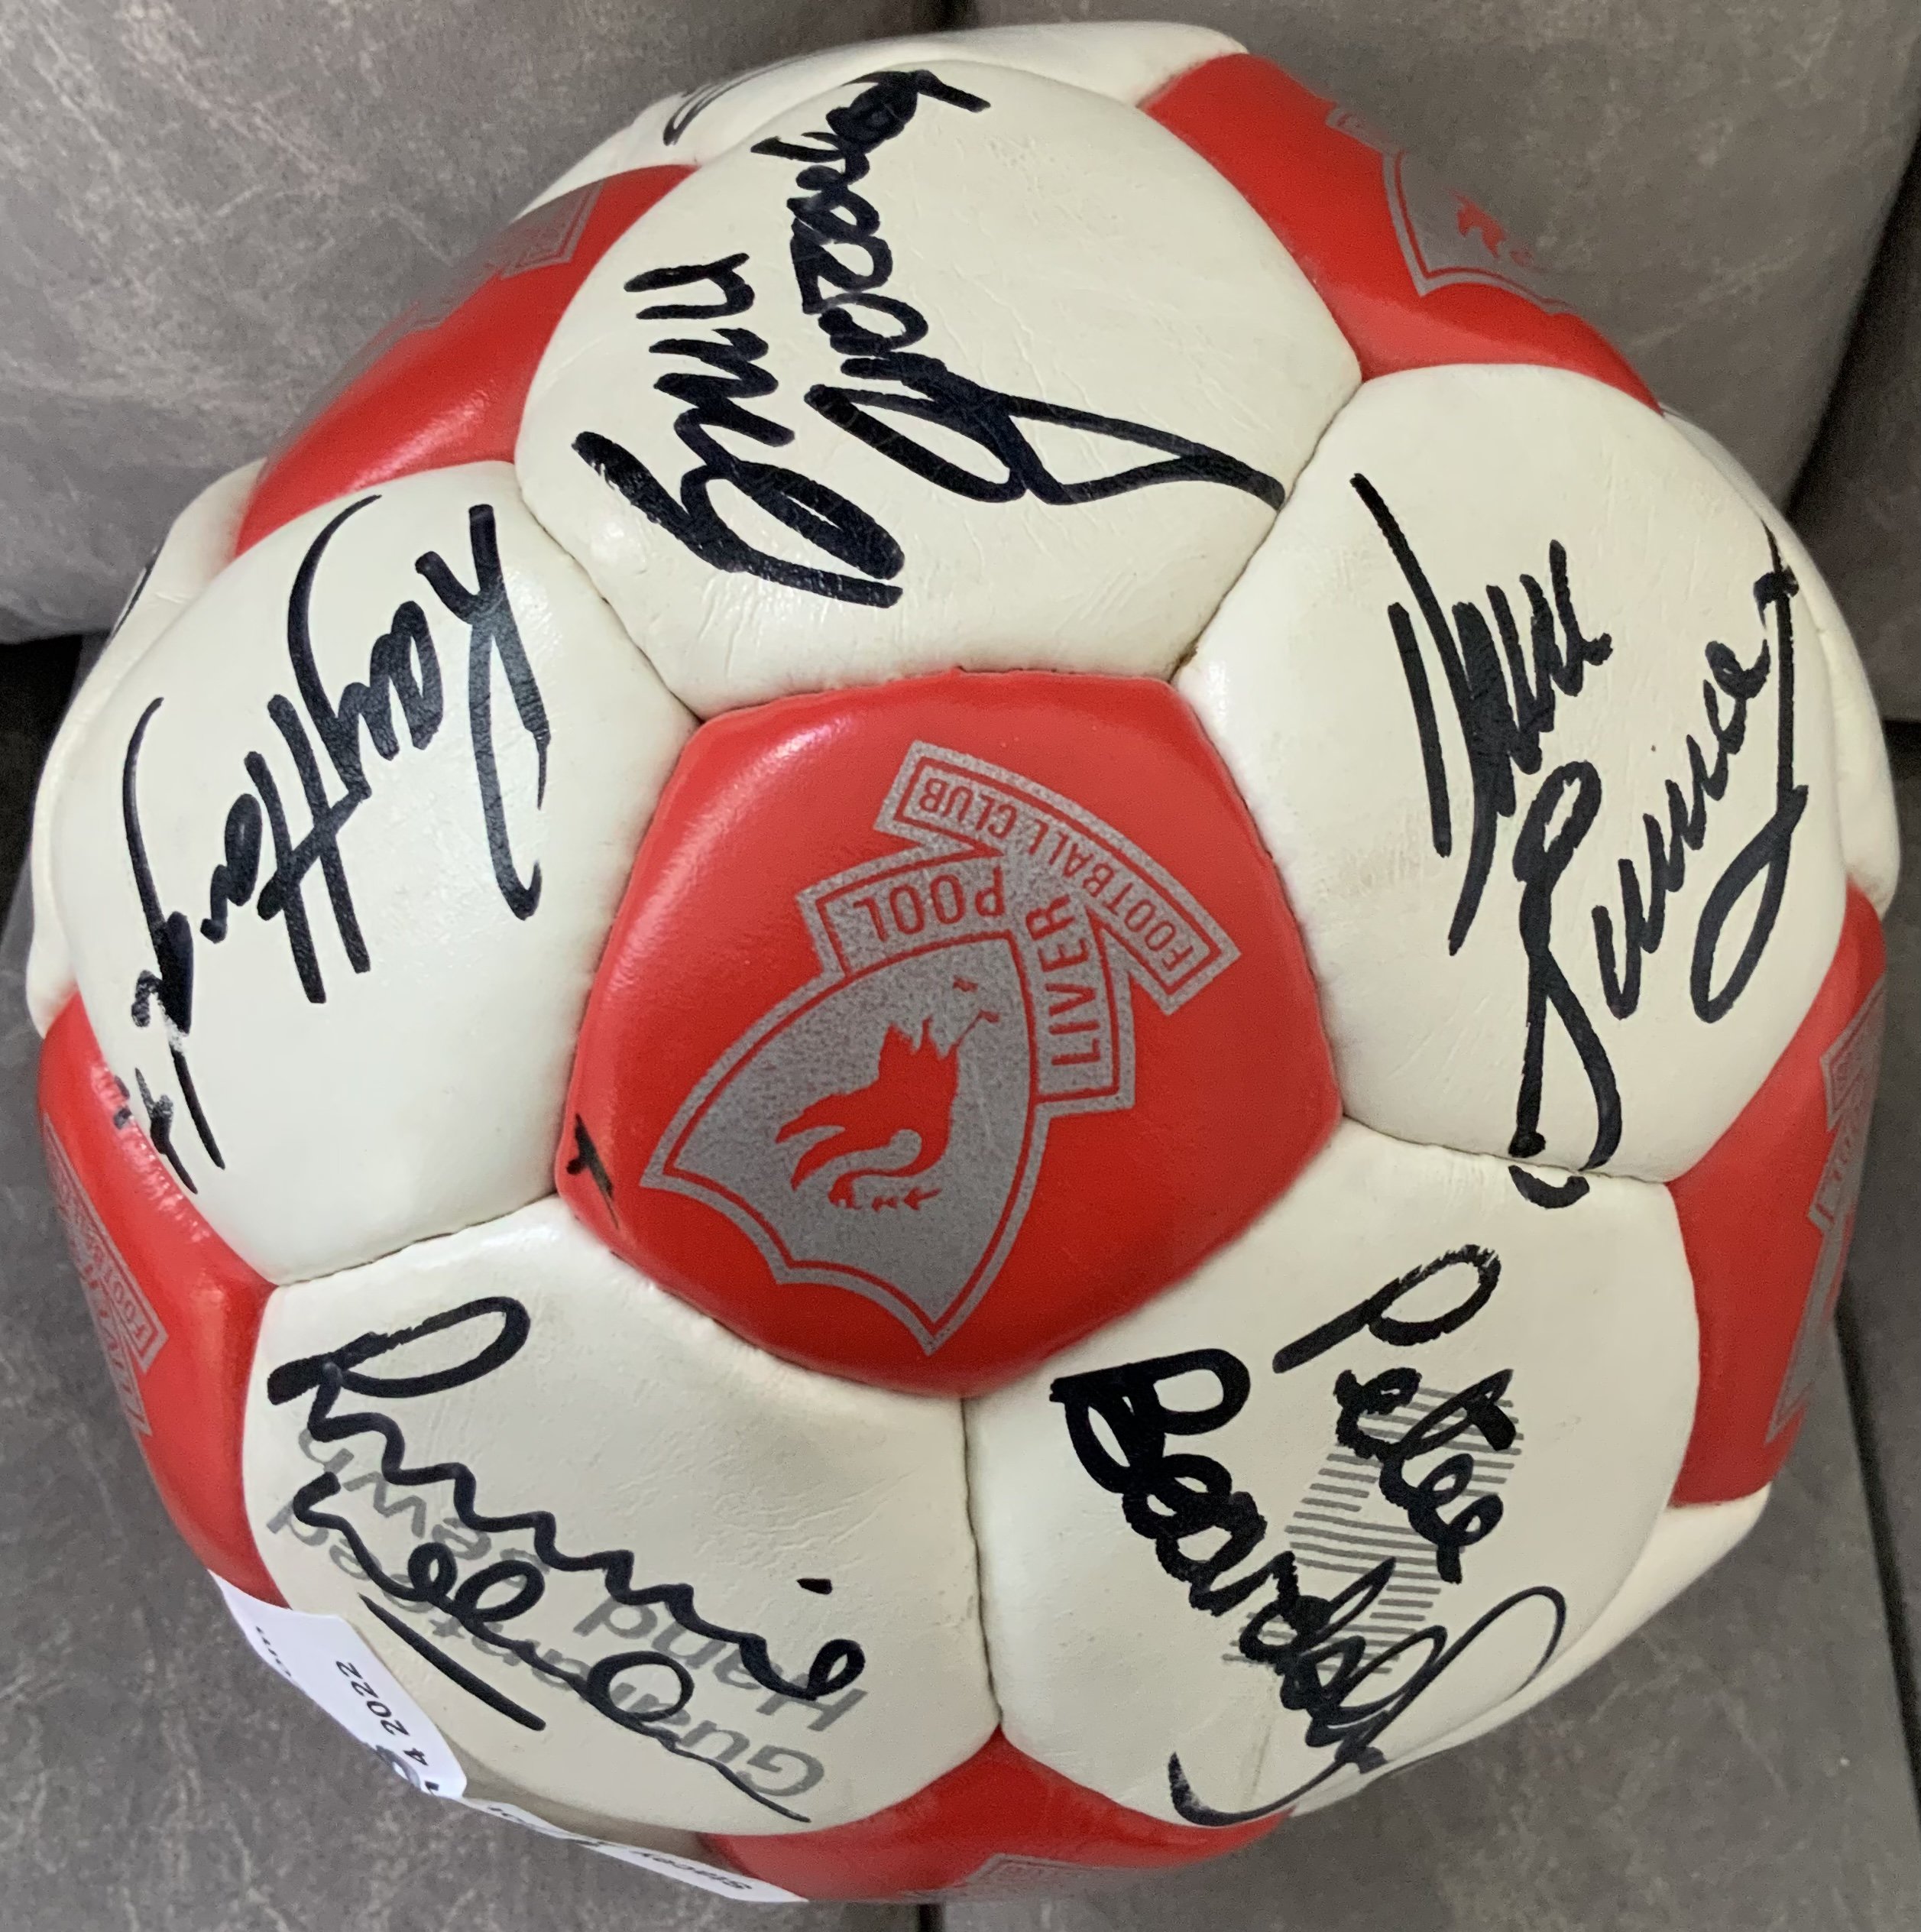 Liverpool 88/89 FA Cup Winners Signed Football: Official Liverpool ball with genuine autographs - Image 2 of 5